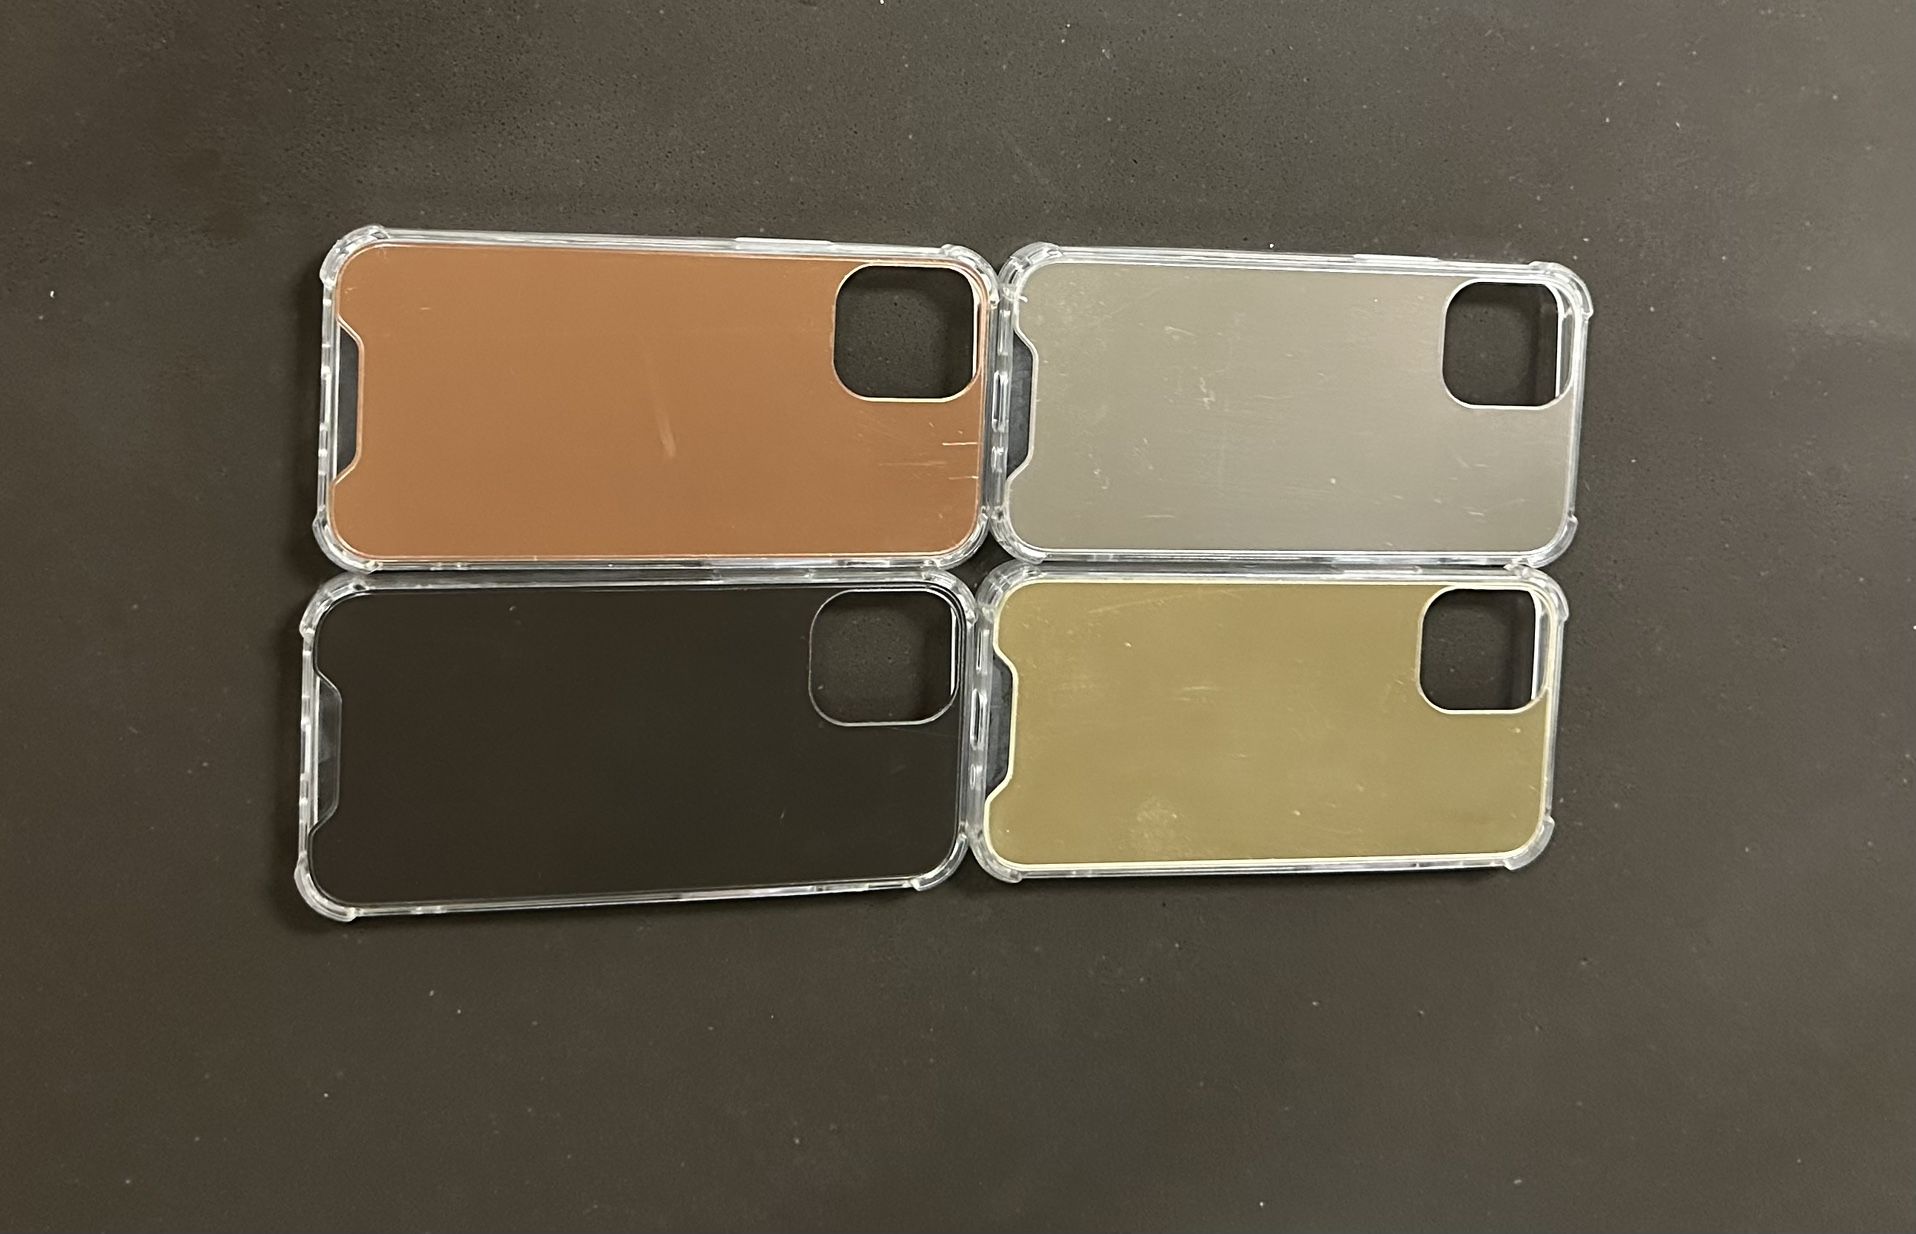 Metallic Phone Cases for IPhone 12 Mini  Approximately 80 phone cases, 4 colors  $100